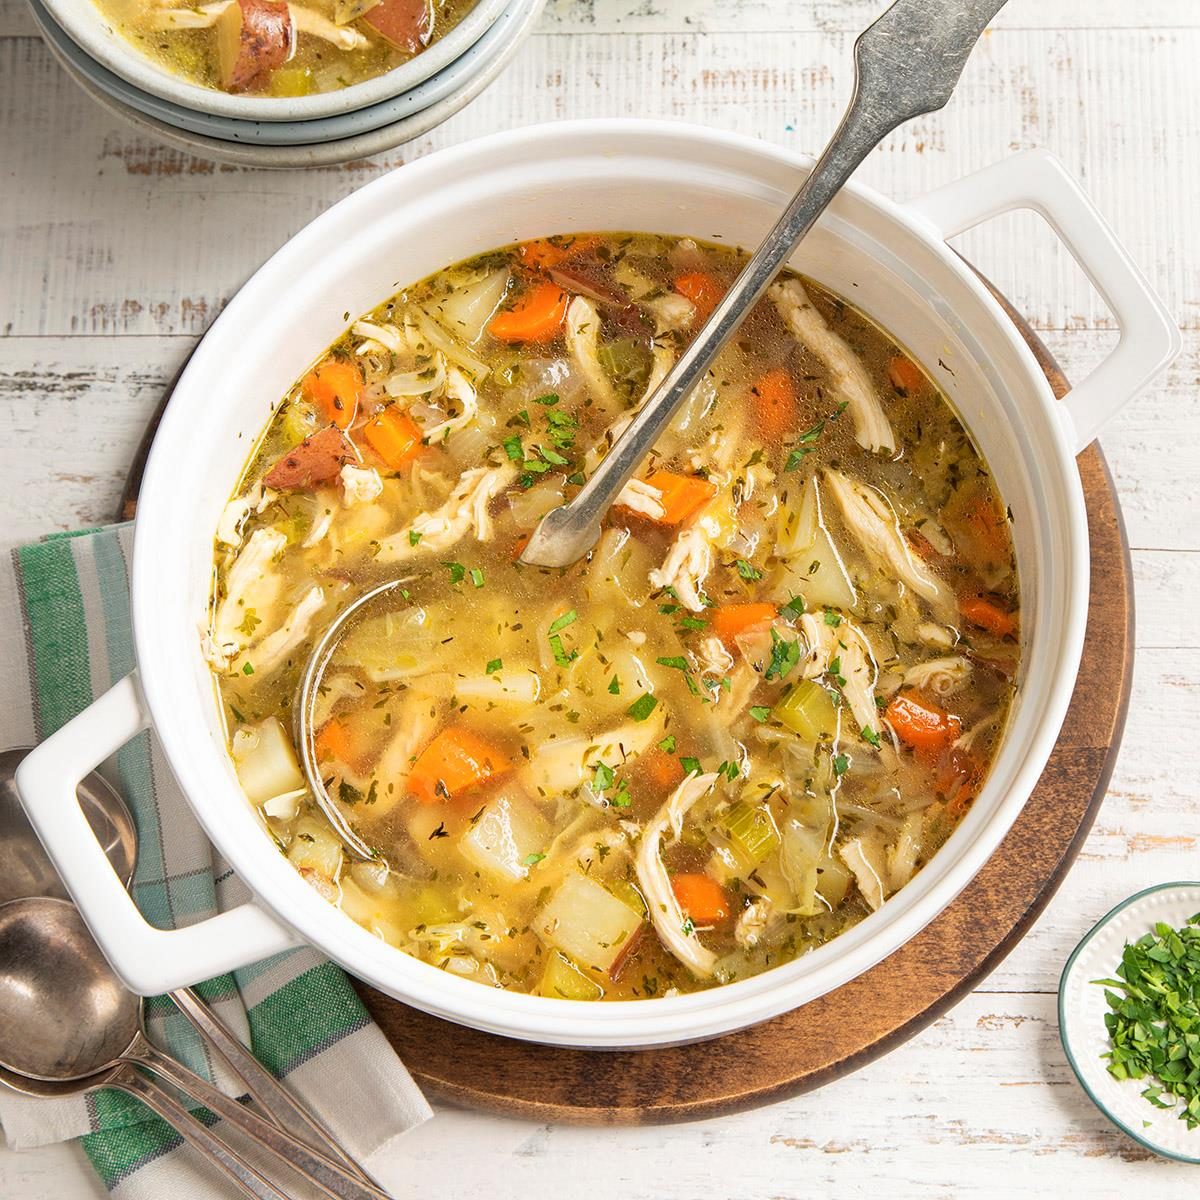 https://www.tasteofhome.com/wp-content/uploads/2023/02/Chicken-Soup-with-Cabbage_EXPS_FT22_271771_ST_12_14_1.jpg?fit=700%2C1024